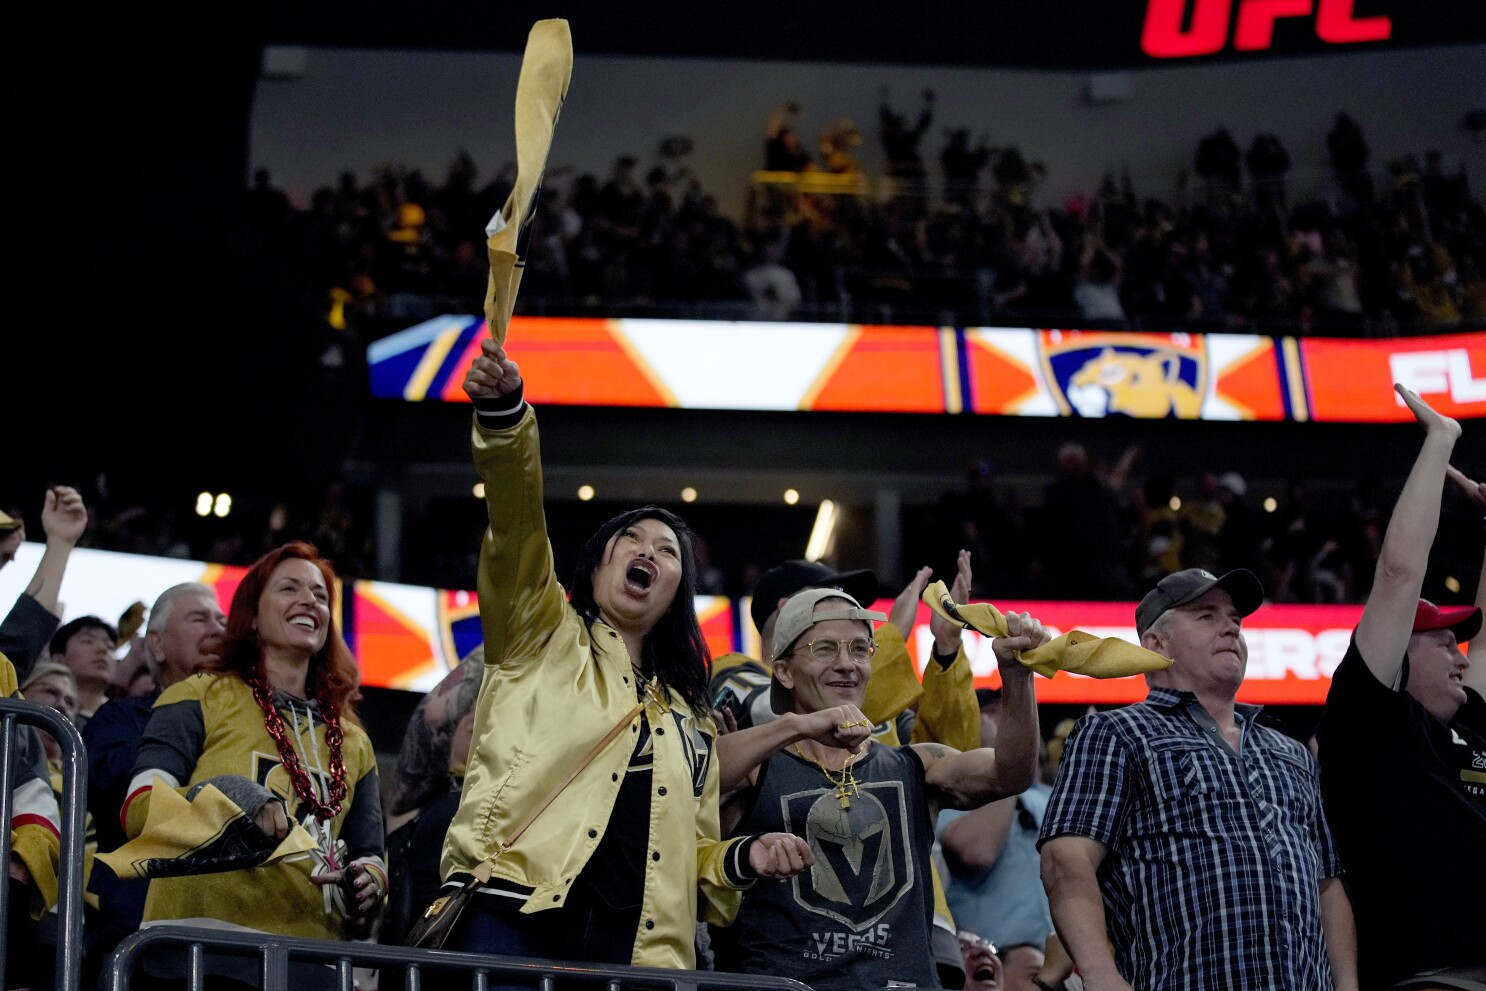 Bring on the fans! T-Mobile to increase fan capacity for next Golden Knights  game